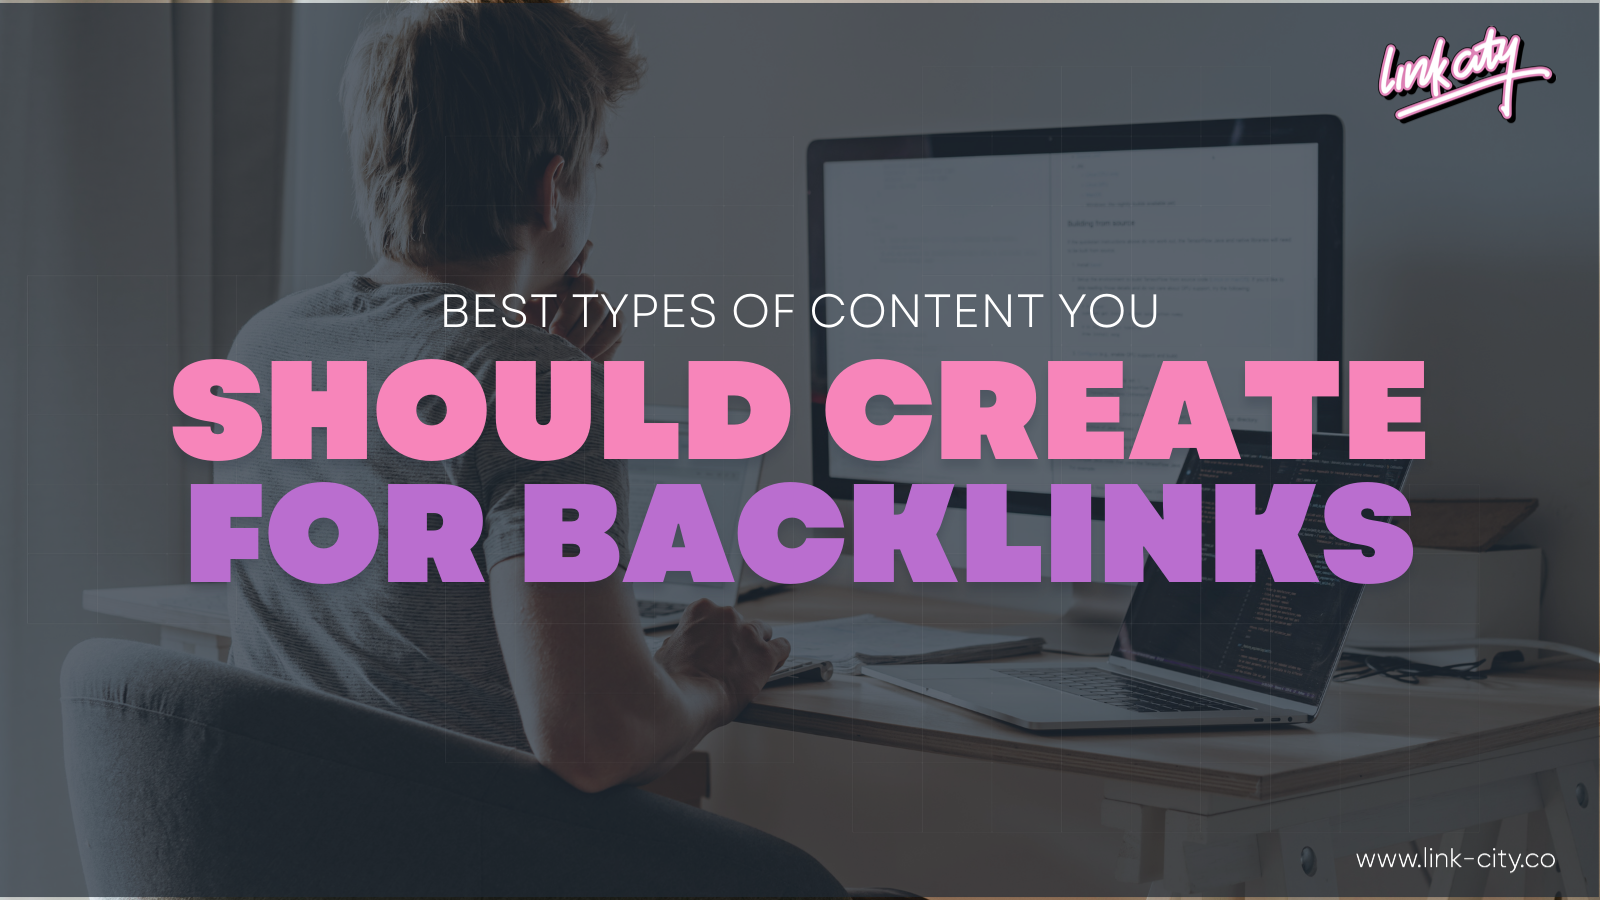 8 Best Types of Content You Should Create for Backlinks